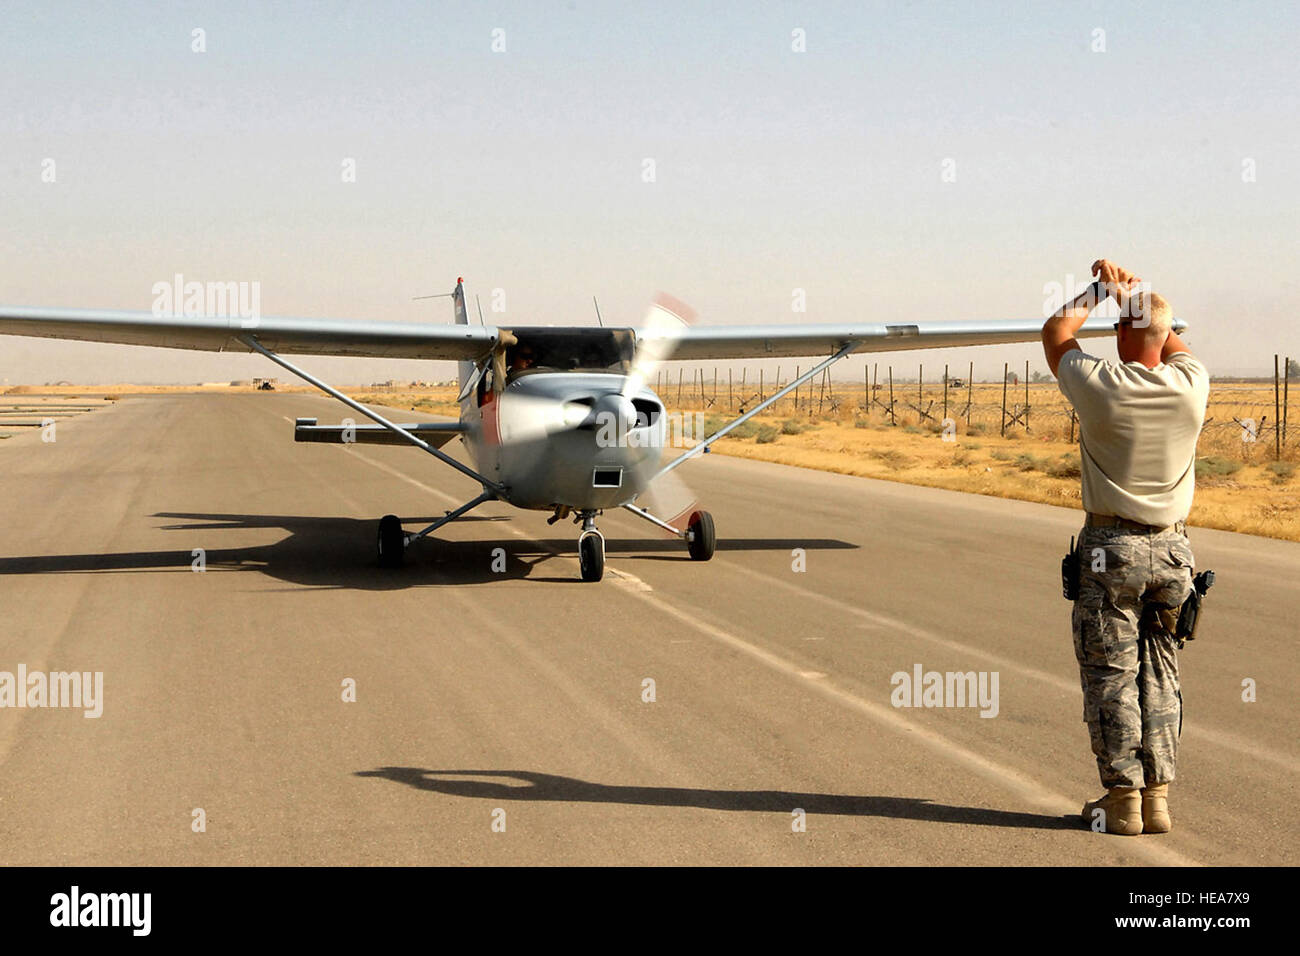 Staff Sgt. Kevin Bremmer marshals a Cessna 172 July 13 at Kirkuk Regional Air Base, Iraq.  The aircraft was flown by 2nd Lt. 'Joseph,' an Iraqi air force student pilot, and Capt. Jamie Riddle, a 52nd Expeditionary Flying Training Squadron instructor pilot. The pilots surpassed 2,000 flight training hours, marking a milestone for the Iraqi air force.  Sergeant Bremmer is deployed to the 52nd EFTS from McGuire Air Force Base, N.J., and Captain Riddle is deployed from Columbus AFB, Miss.  Airman First Class Randi Flaugh) Stock Photo